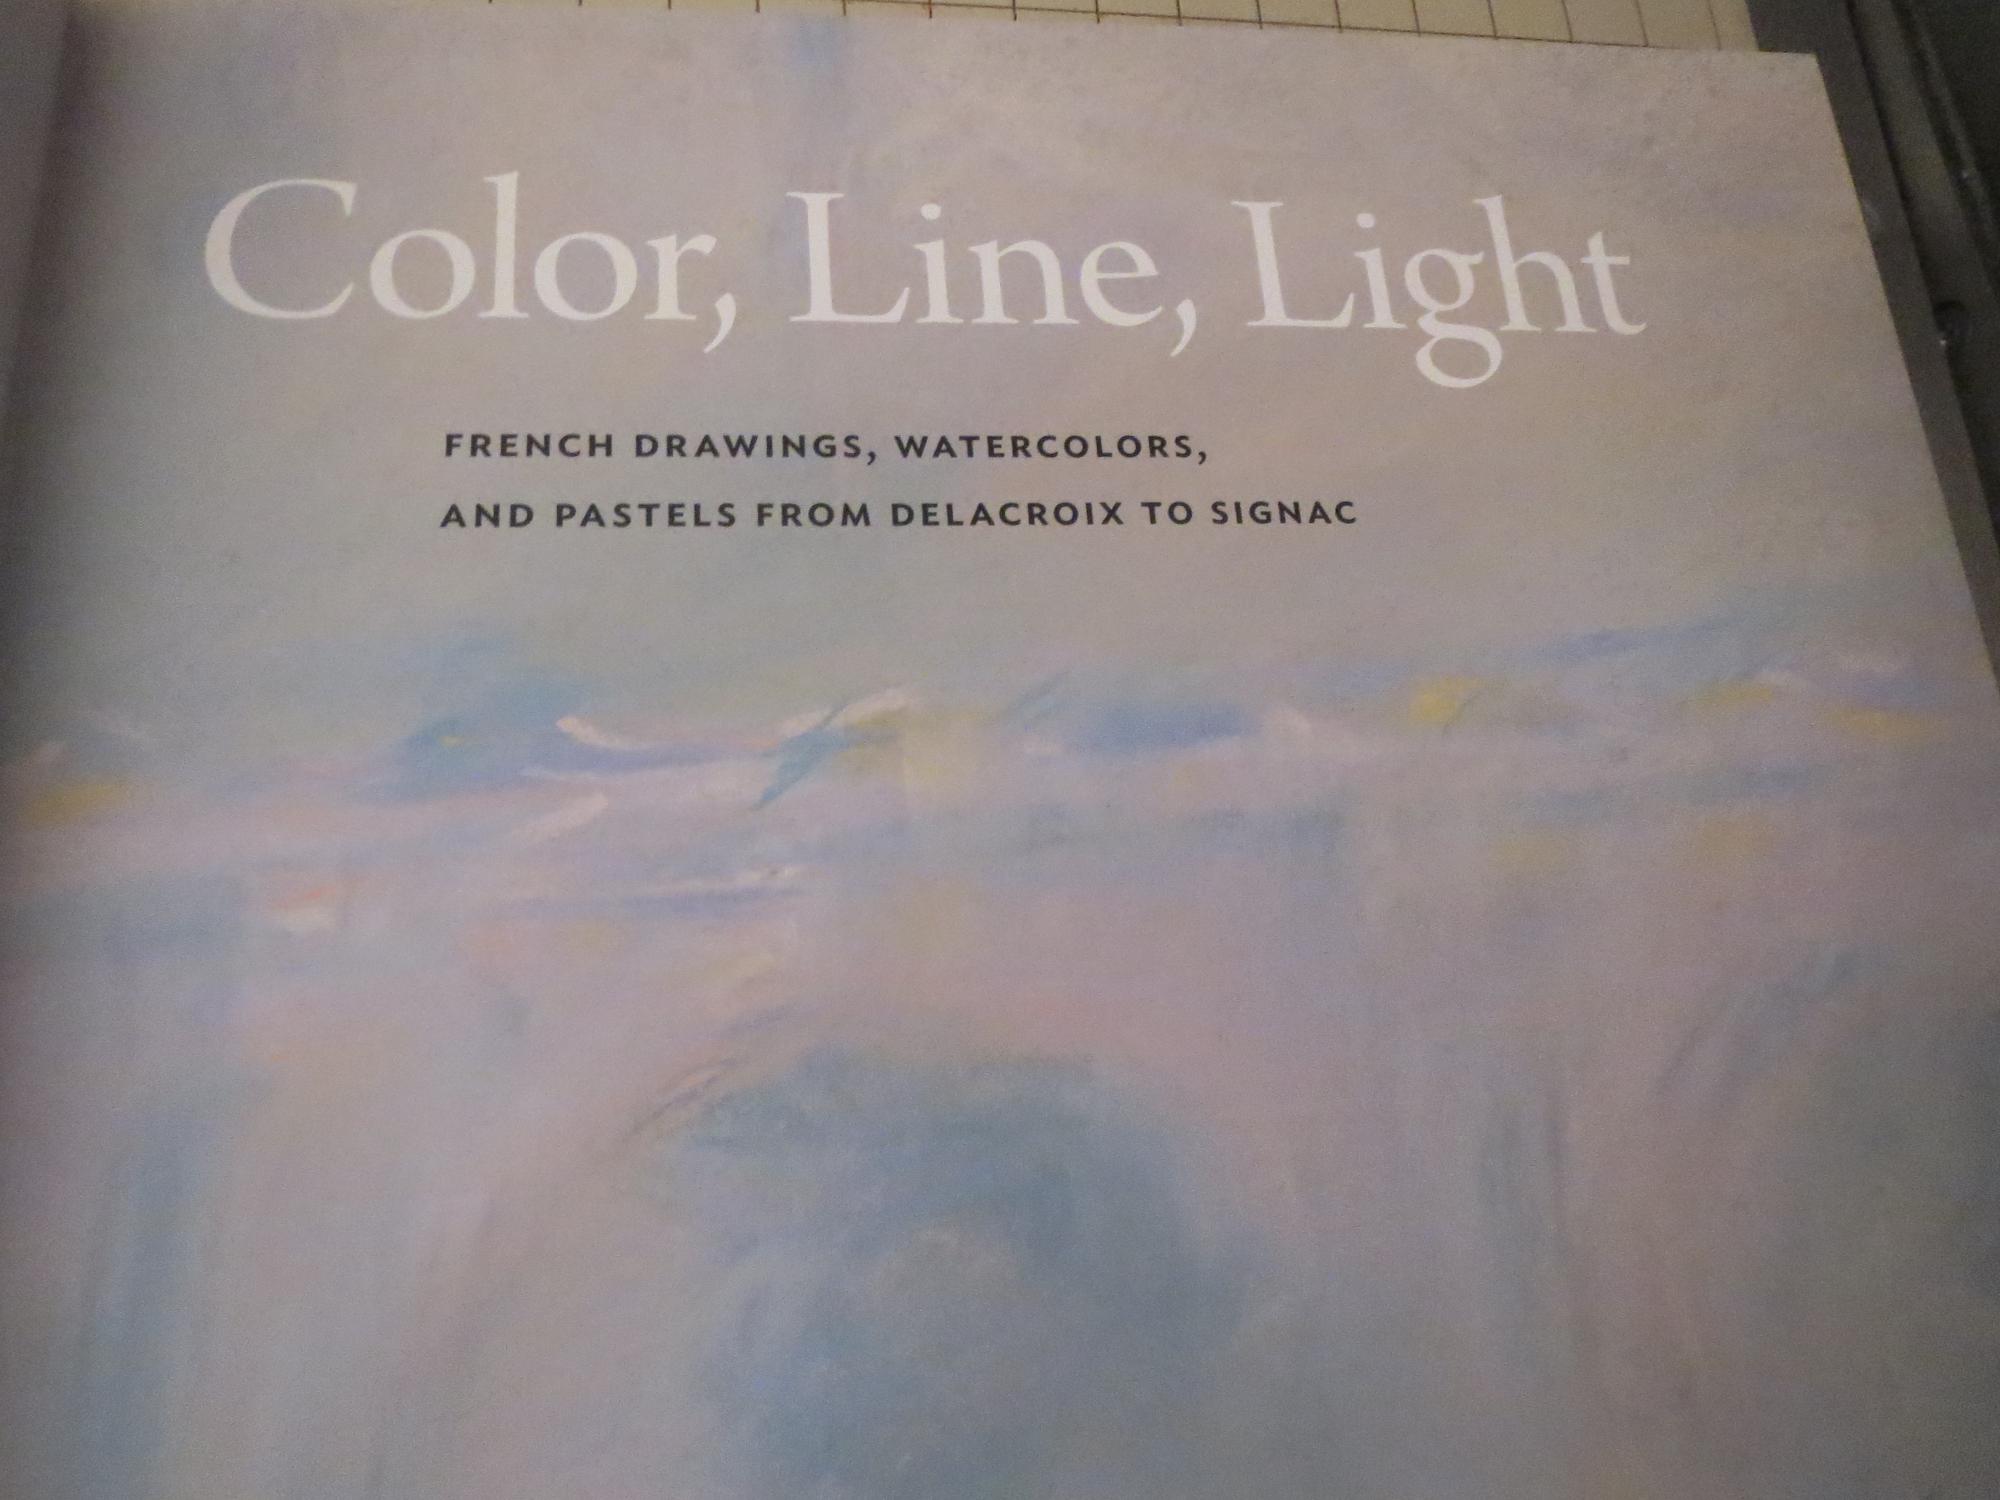 Line Light: French Drawings Color Watercolors and Pastels from Delacroix to Signac